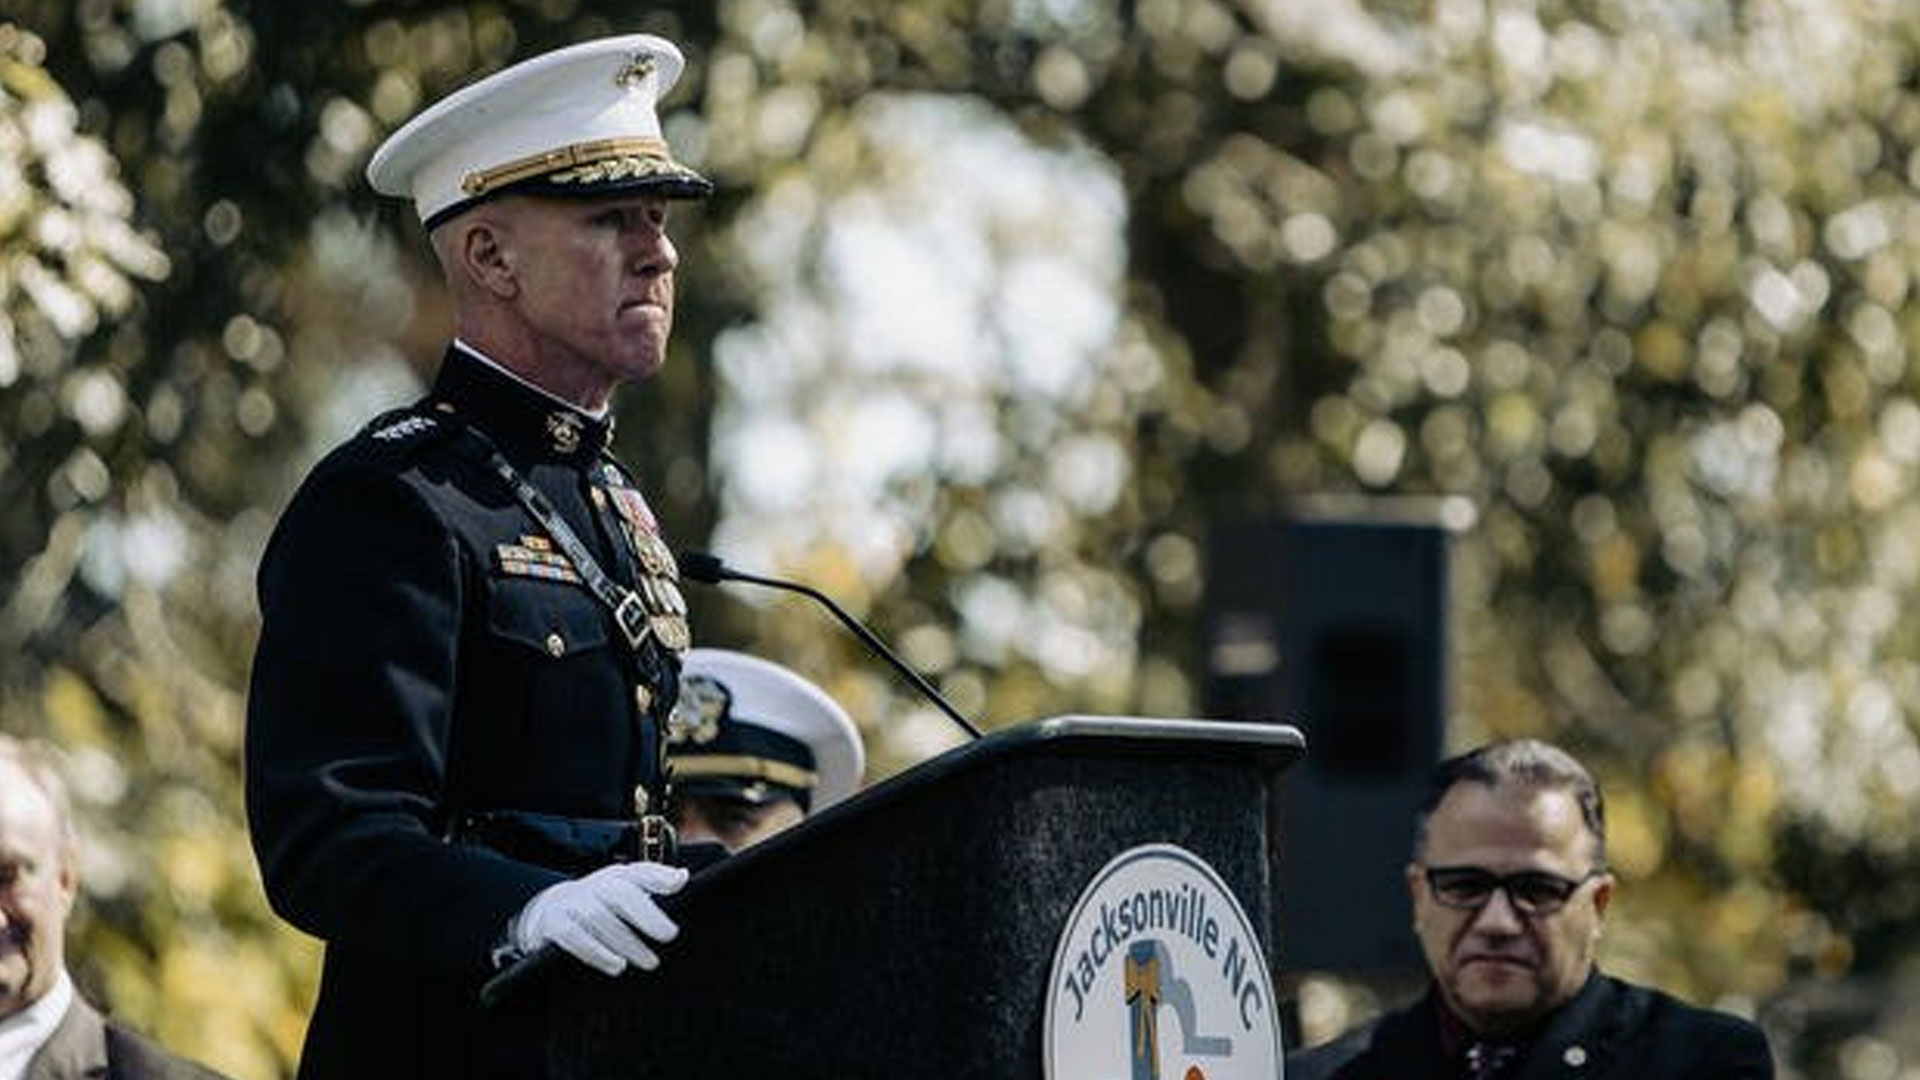 Gen. Eric Smith's Resilience: 'I’m Still in the Fight' After Cardiac Arrest...